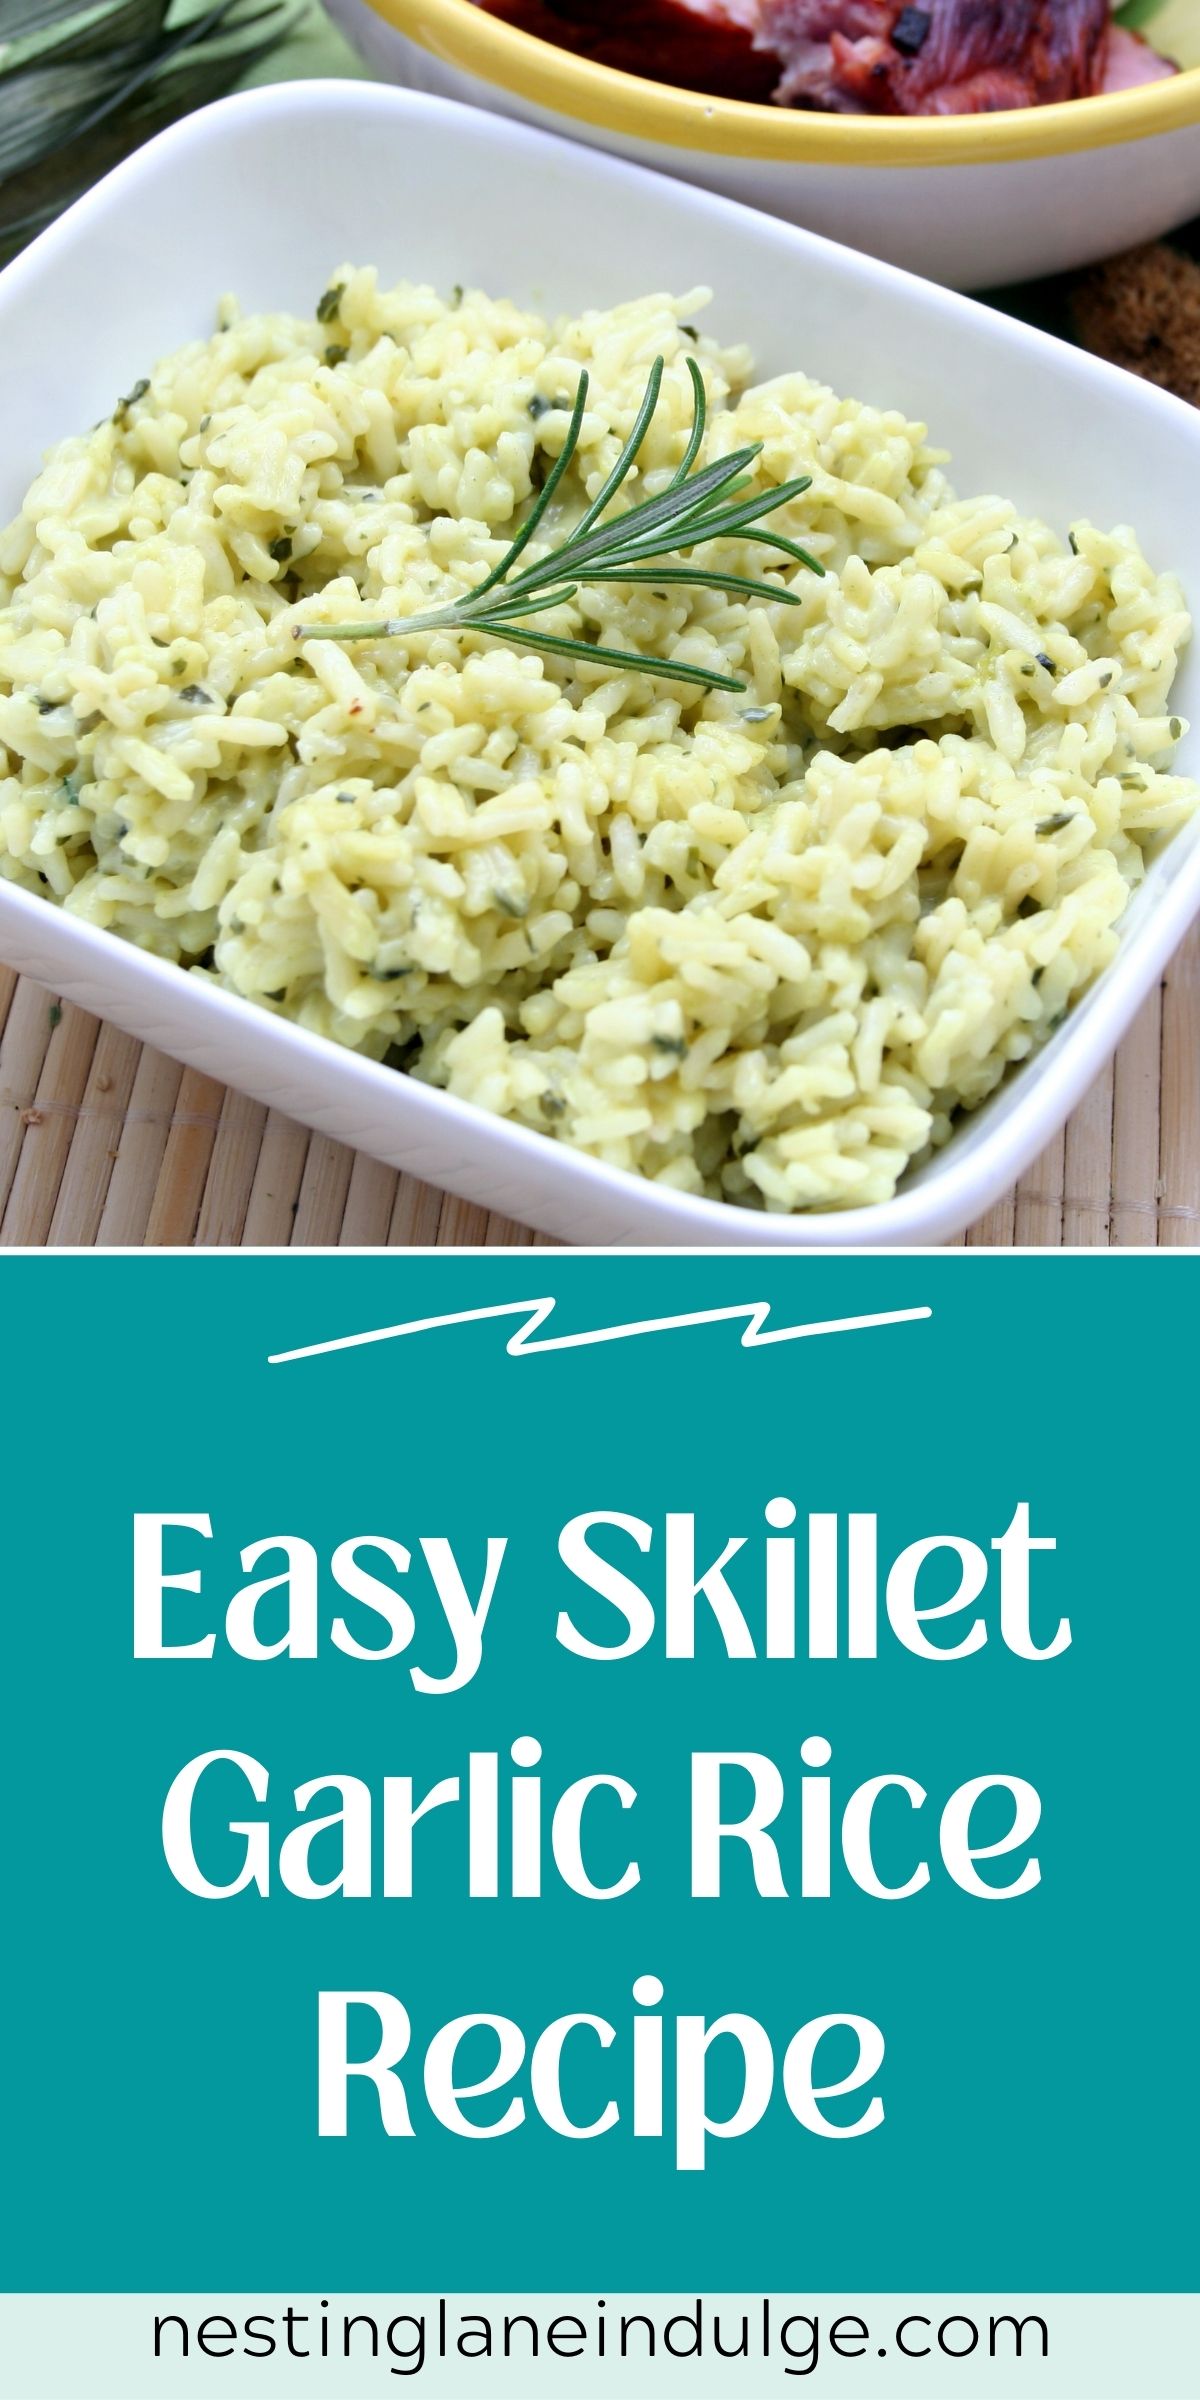 Graphic for Pinterest of Easy Skillet Garlic Rice Recipe.